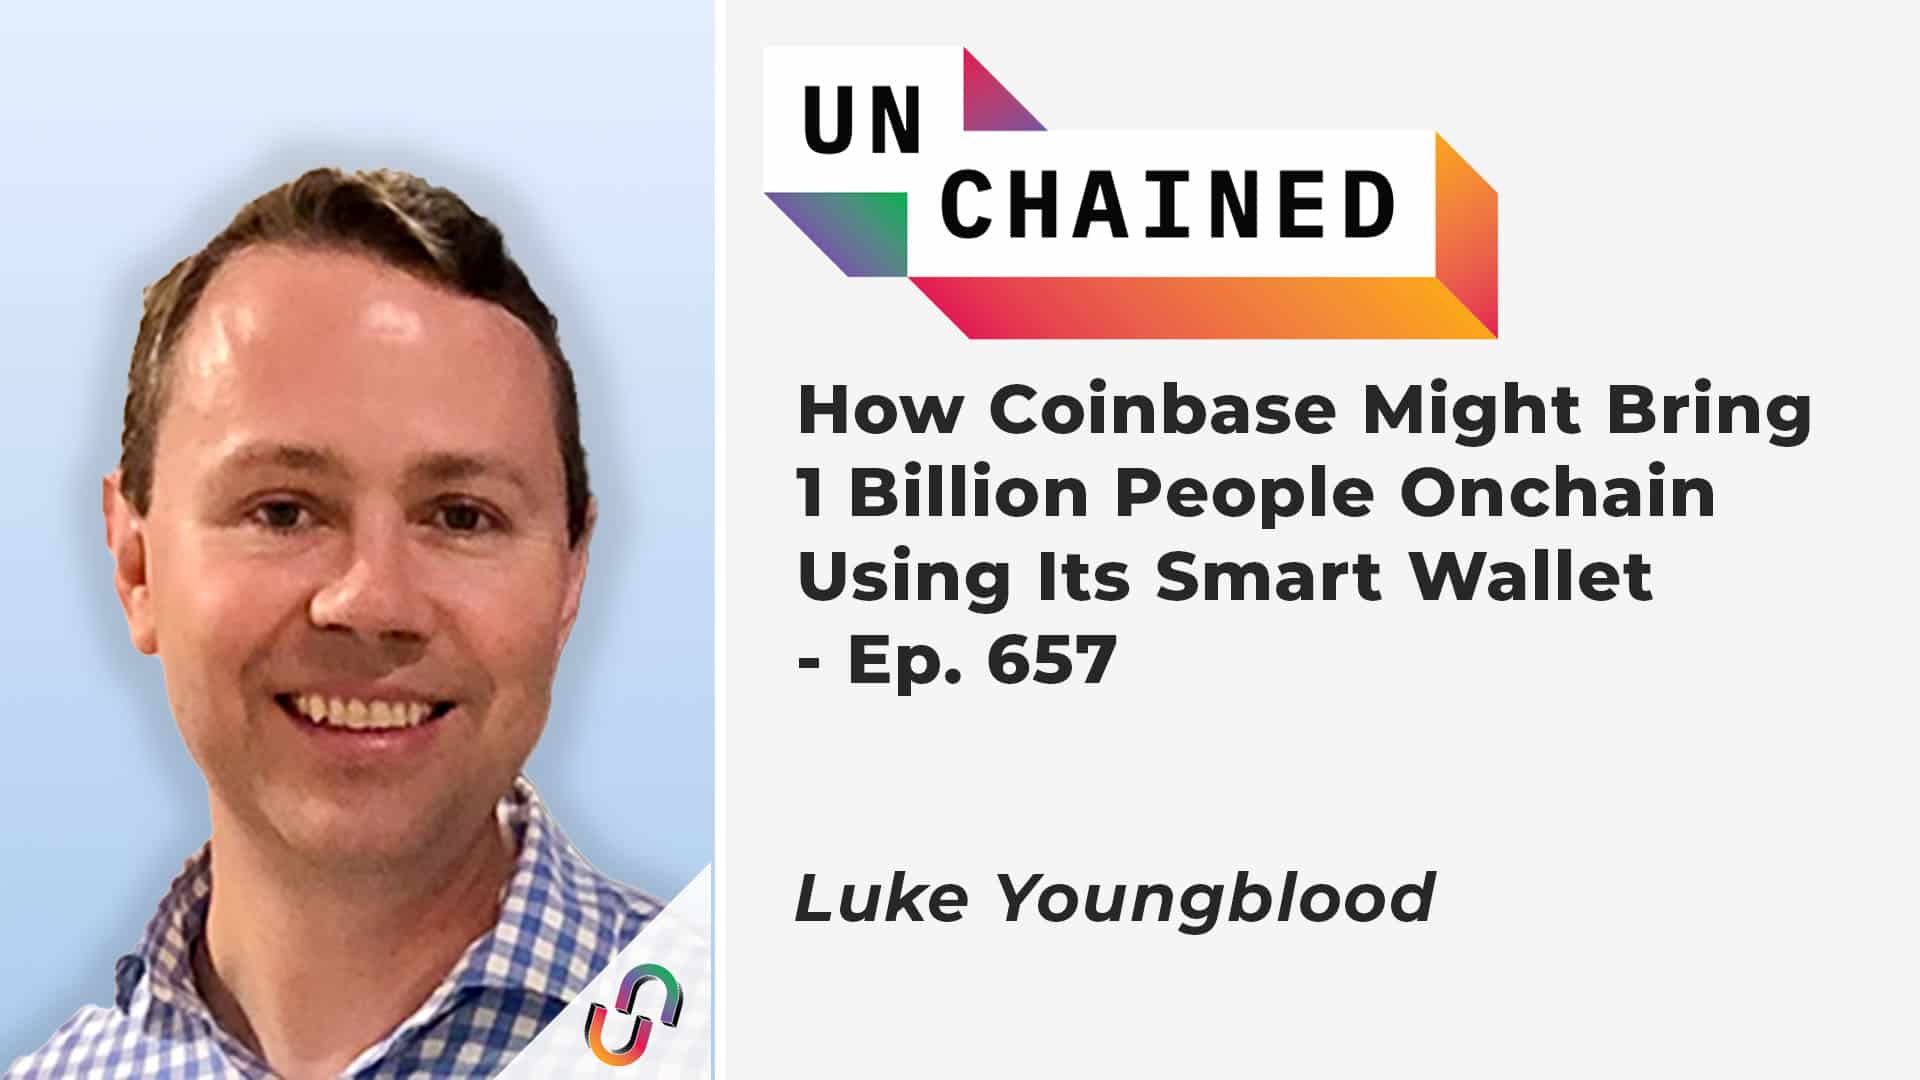 How Coinbase Might Bring 1 Billion People Onchain Using Its Smart Wallet - Ep. 657